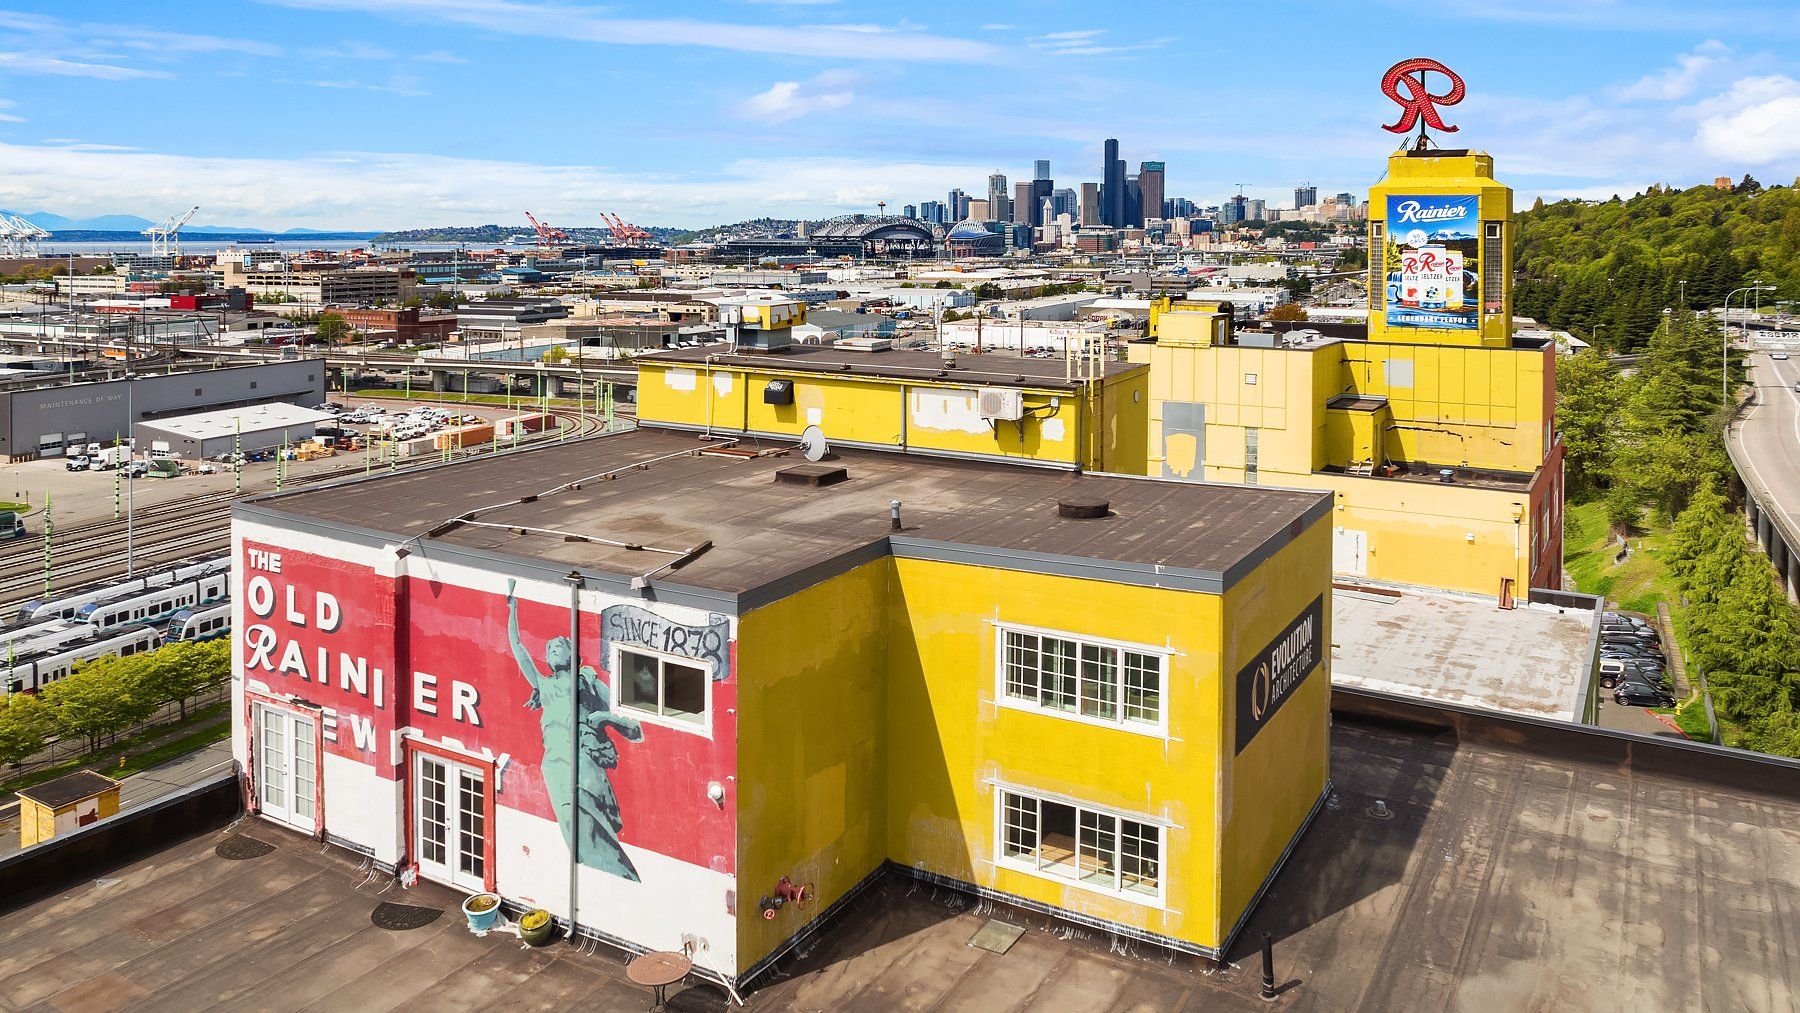 Photo of The Old Rainier Brewery from above